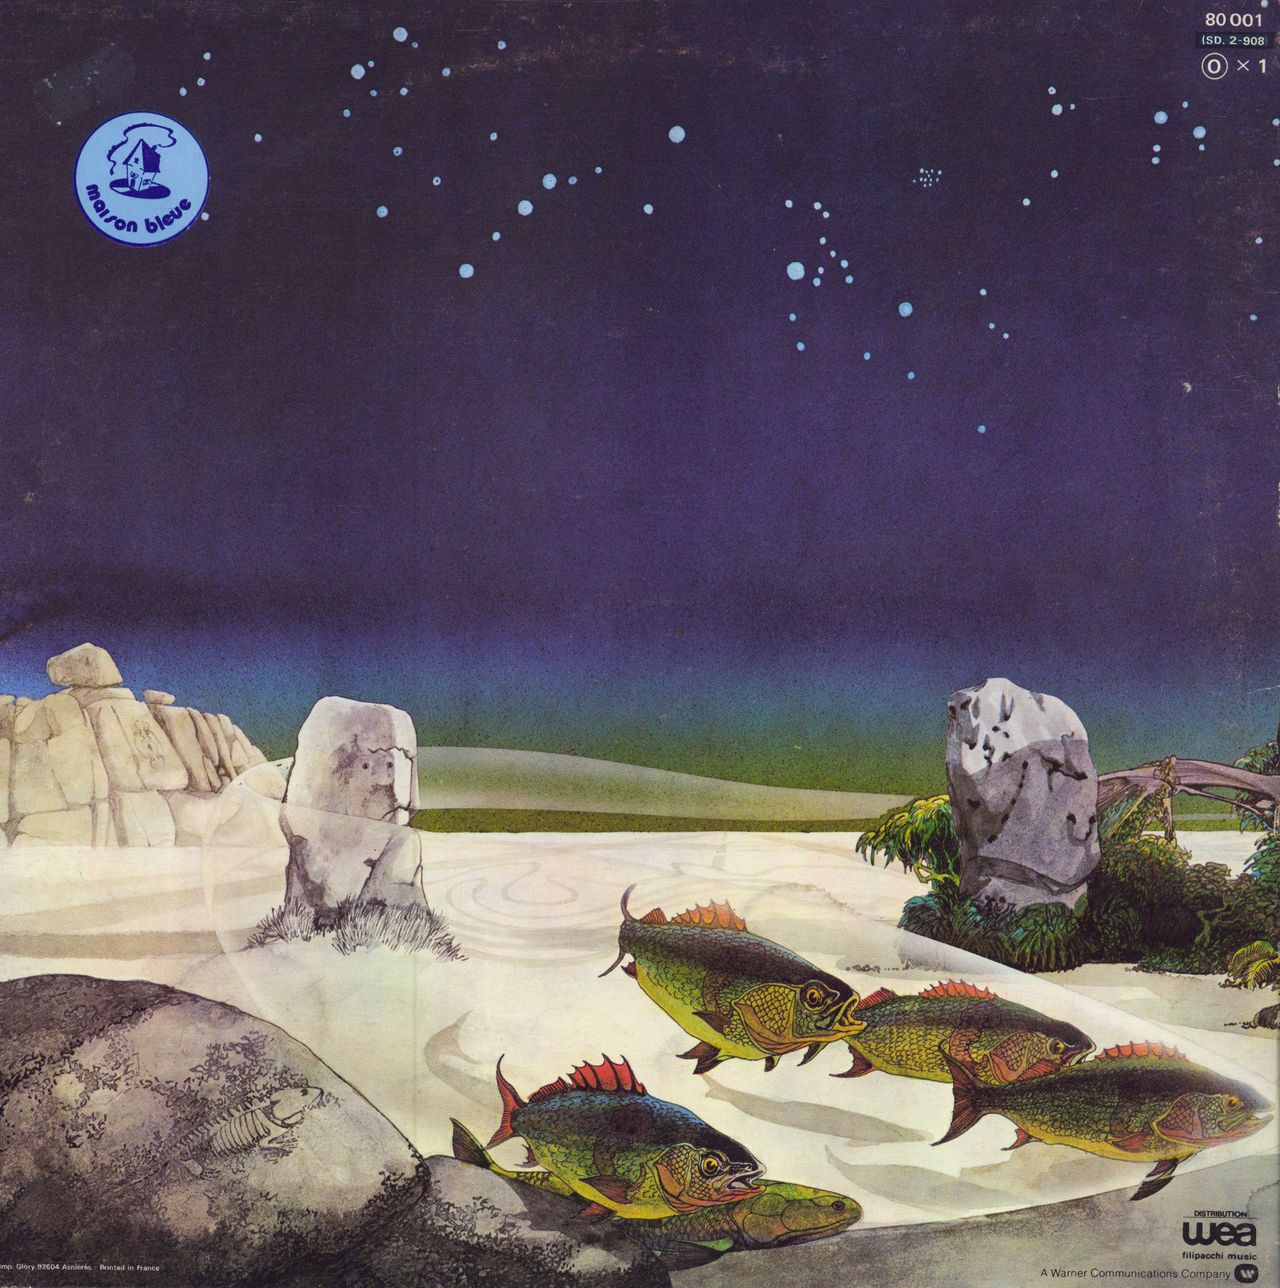 Yes Tales From Topographic Oceans - Hype Sticker French 2-LP vinyl record set (Double LP Album)